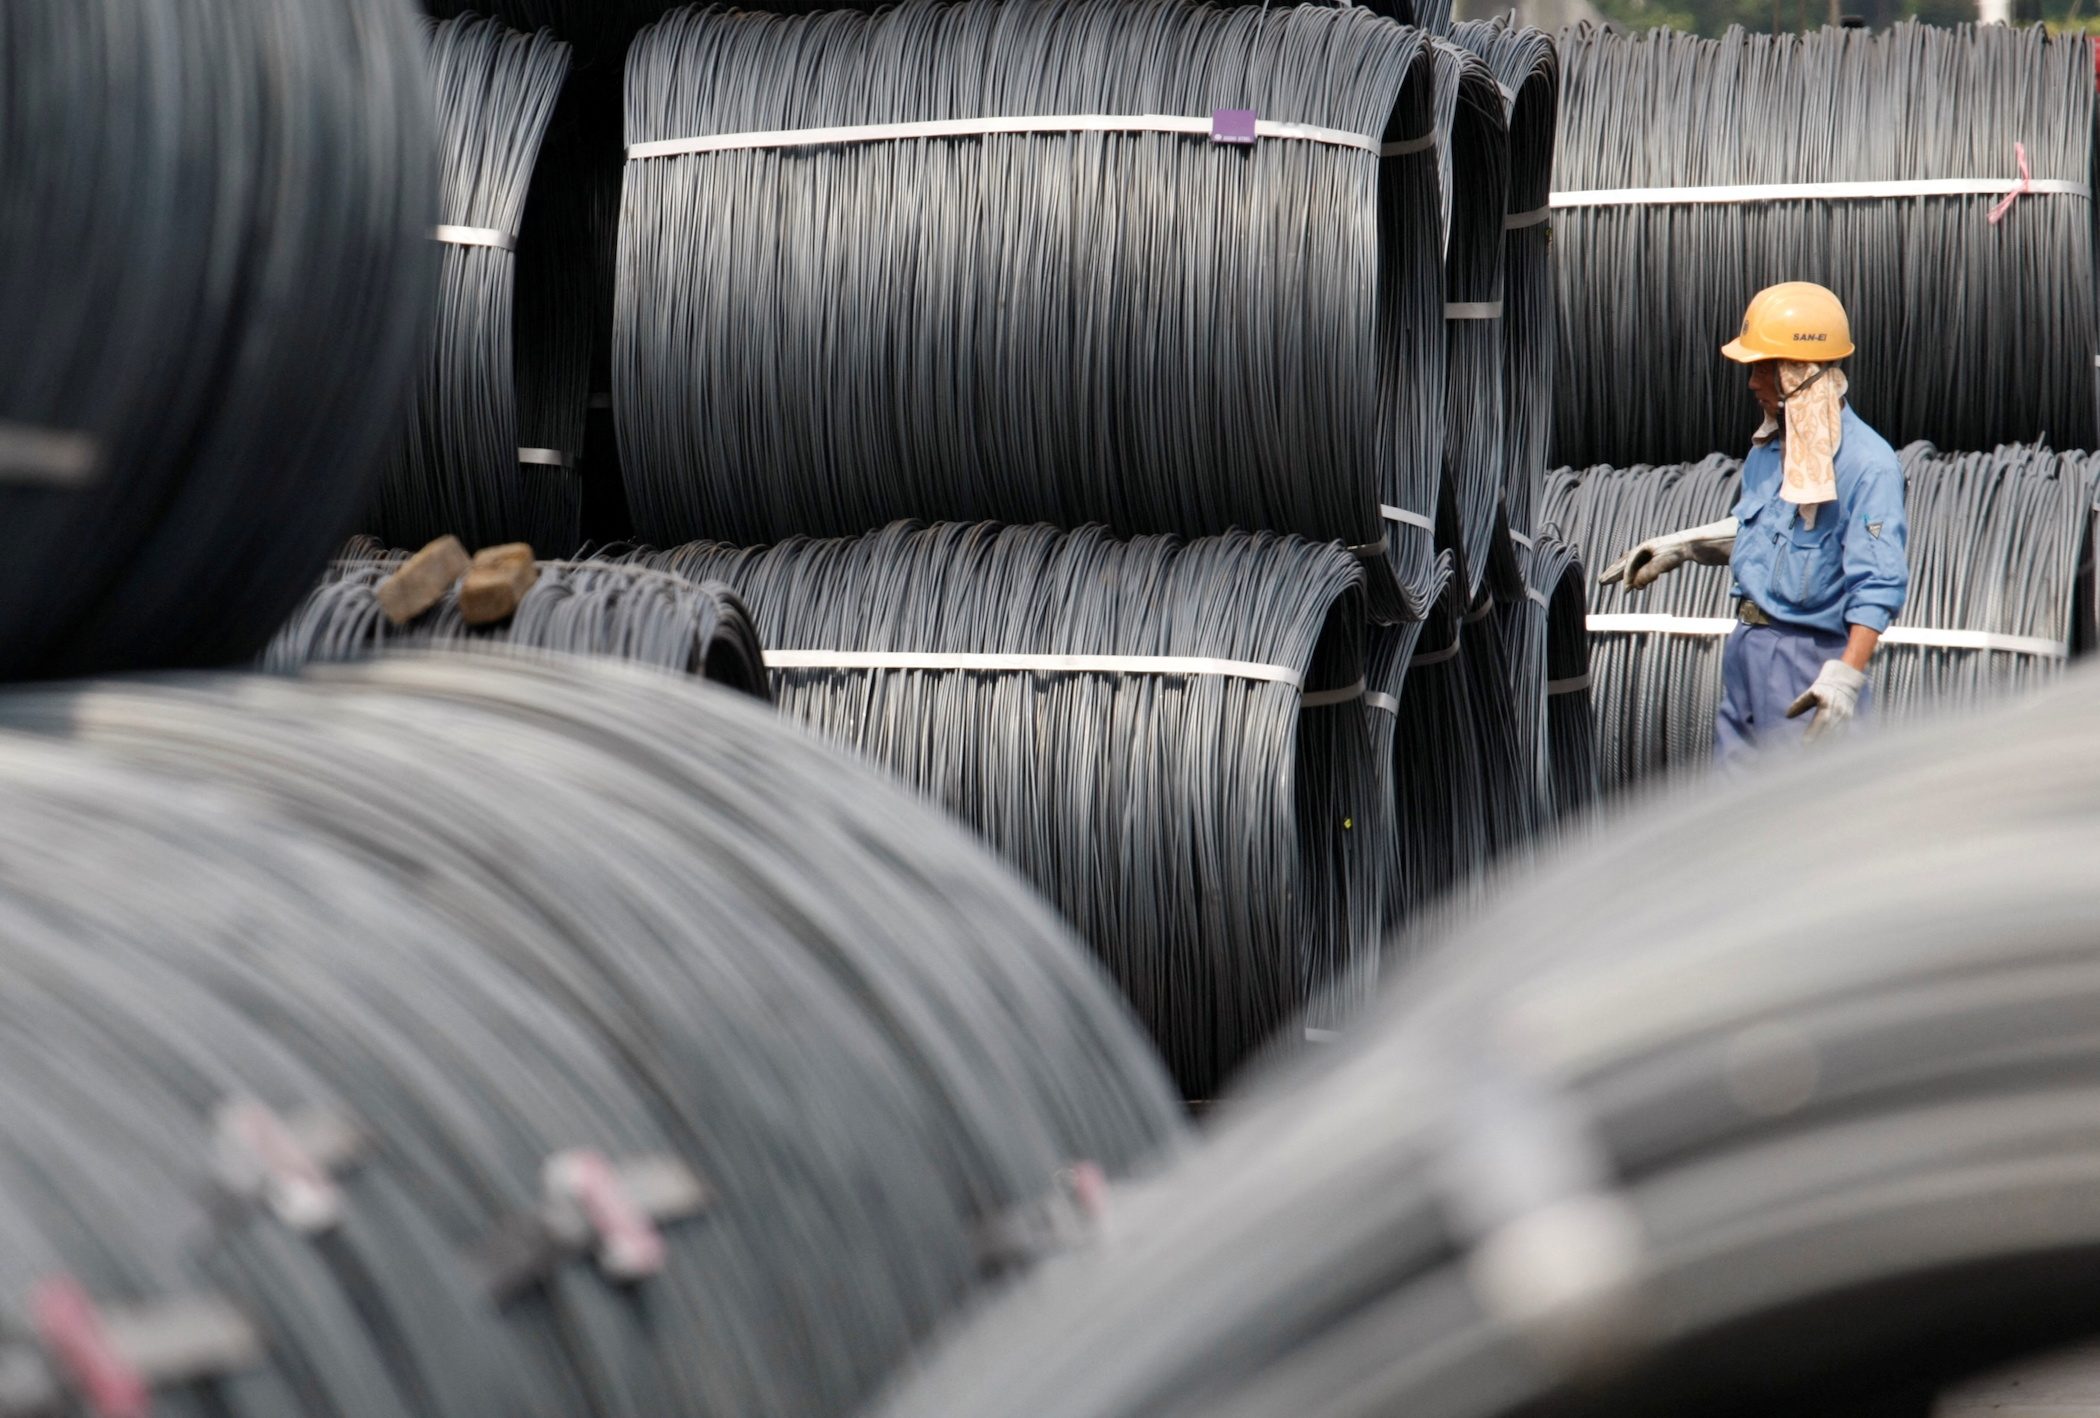 US, Japan reach deal to cut tariffs on Japanese steel, fight excess output